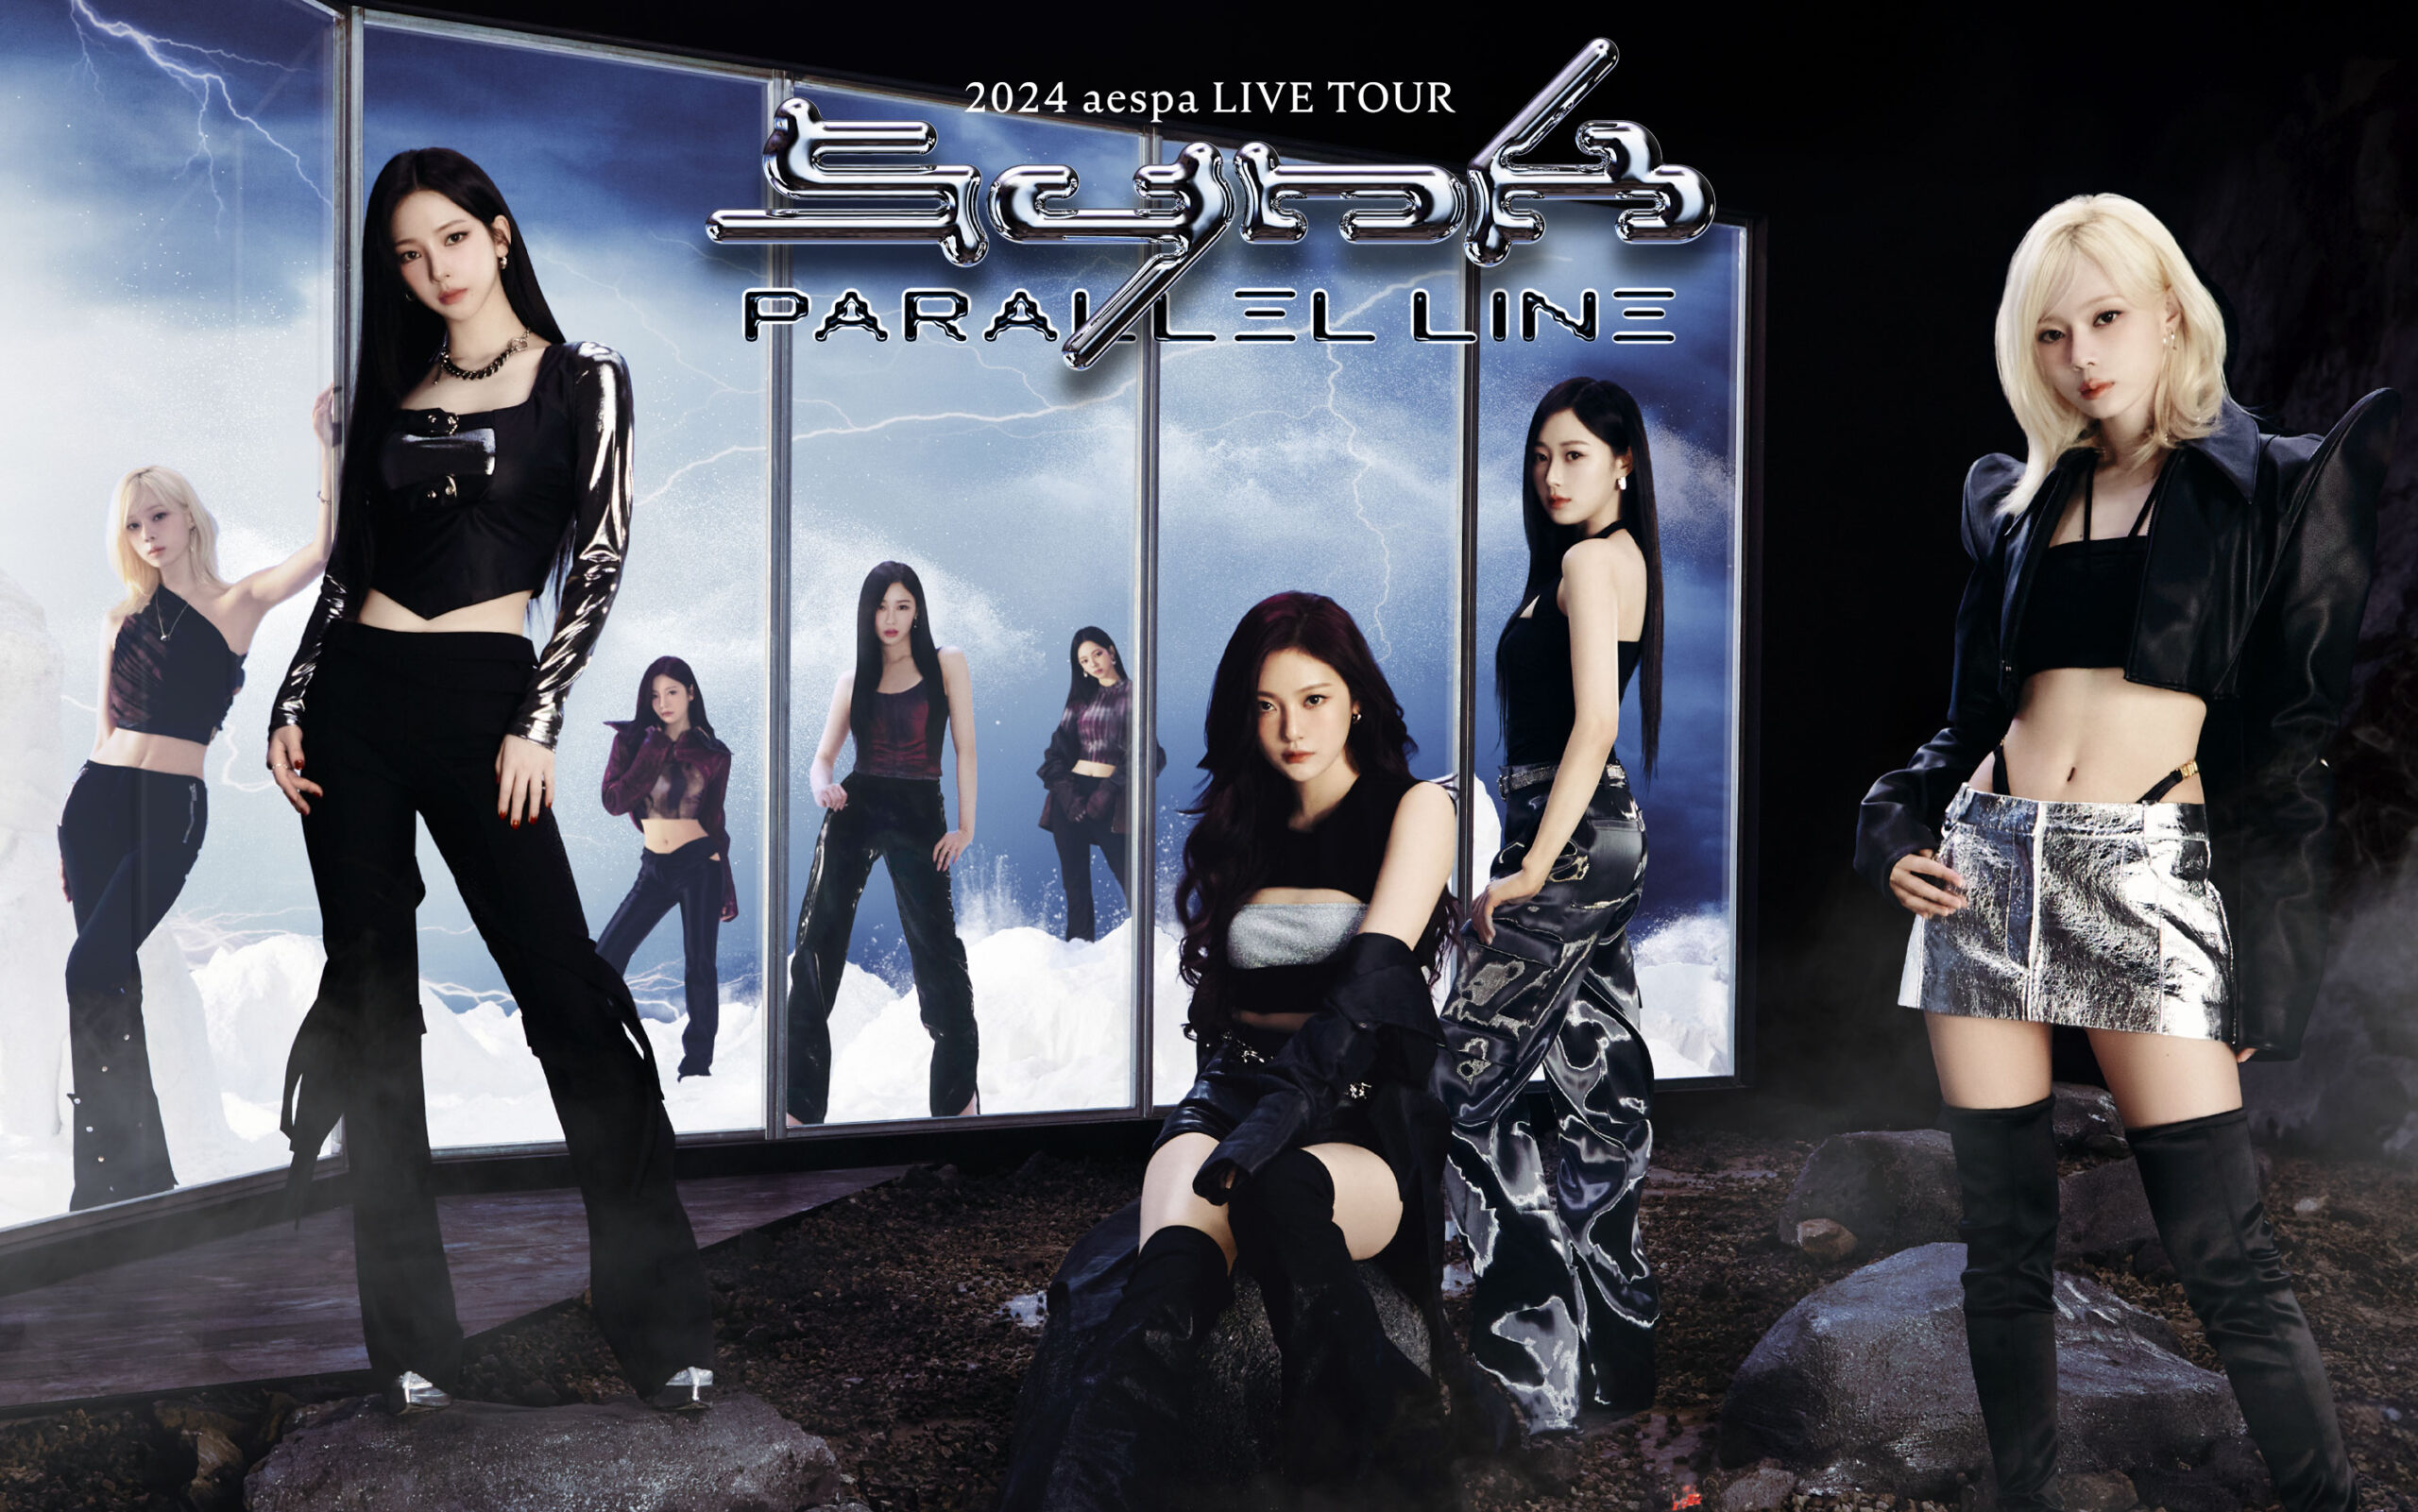 aespa 待望の日本デビュー決定！ 『2024 aespa LIVE TOUR – SYNK : PARALLE LINE -』